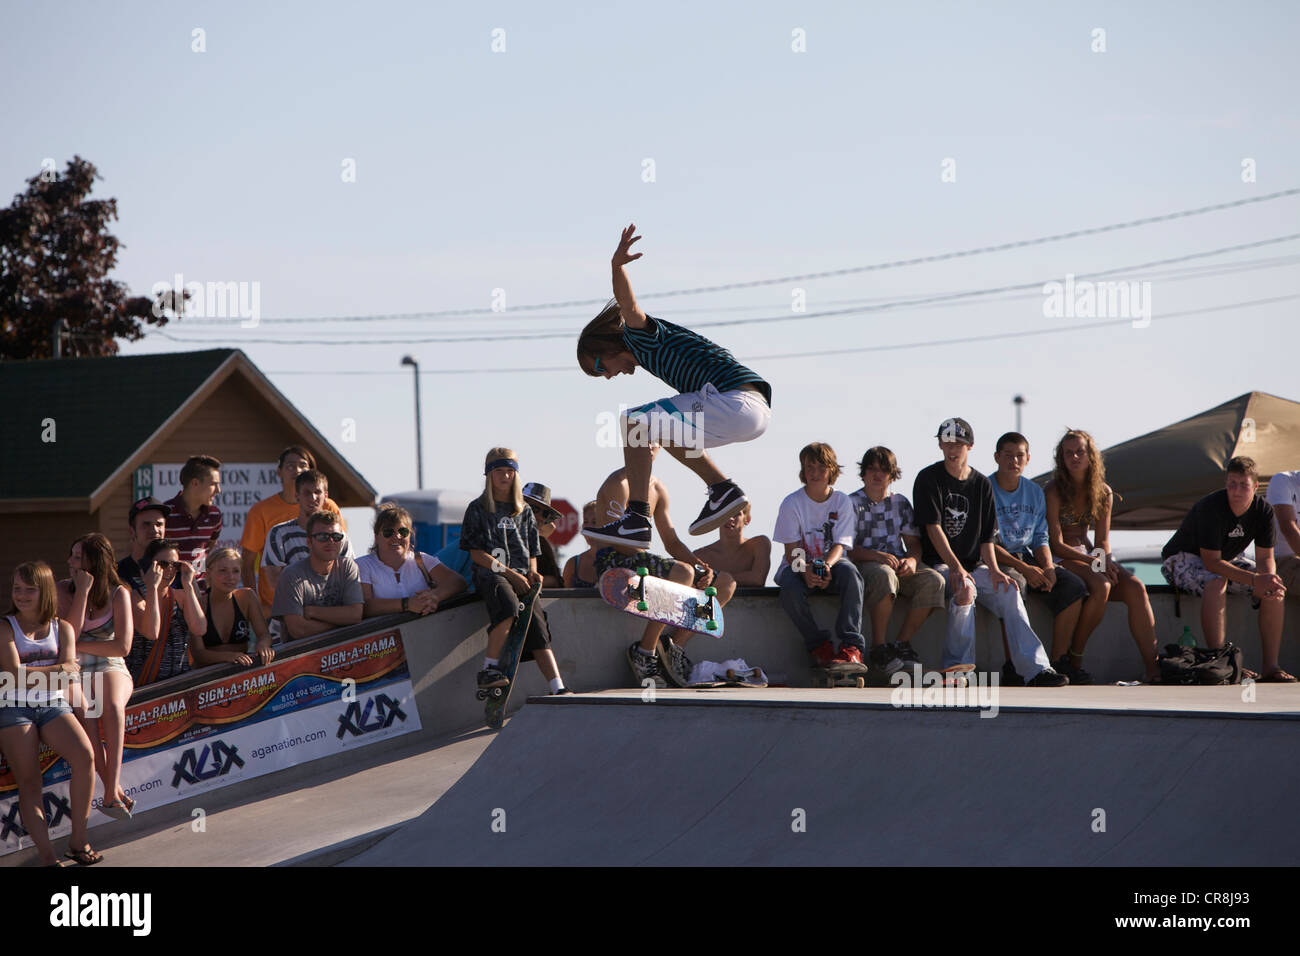 Skateboarder performing a kickflip at the AGA skate competition in Ludington, Michigan Stock Photo